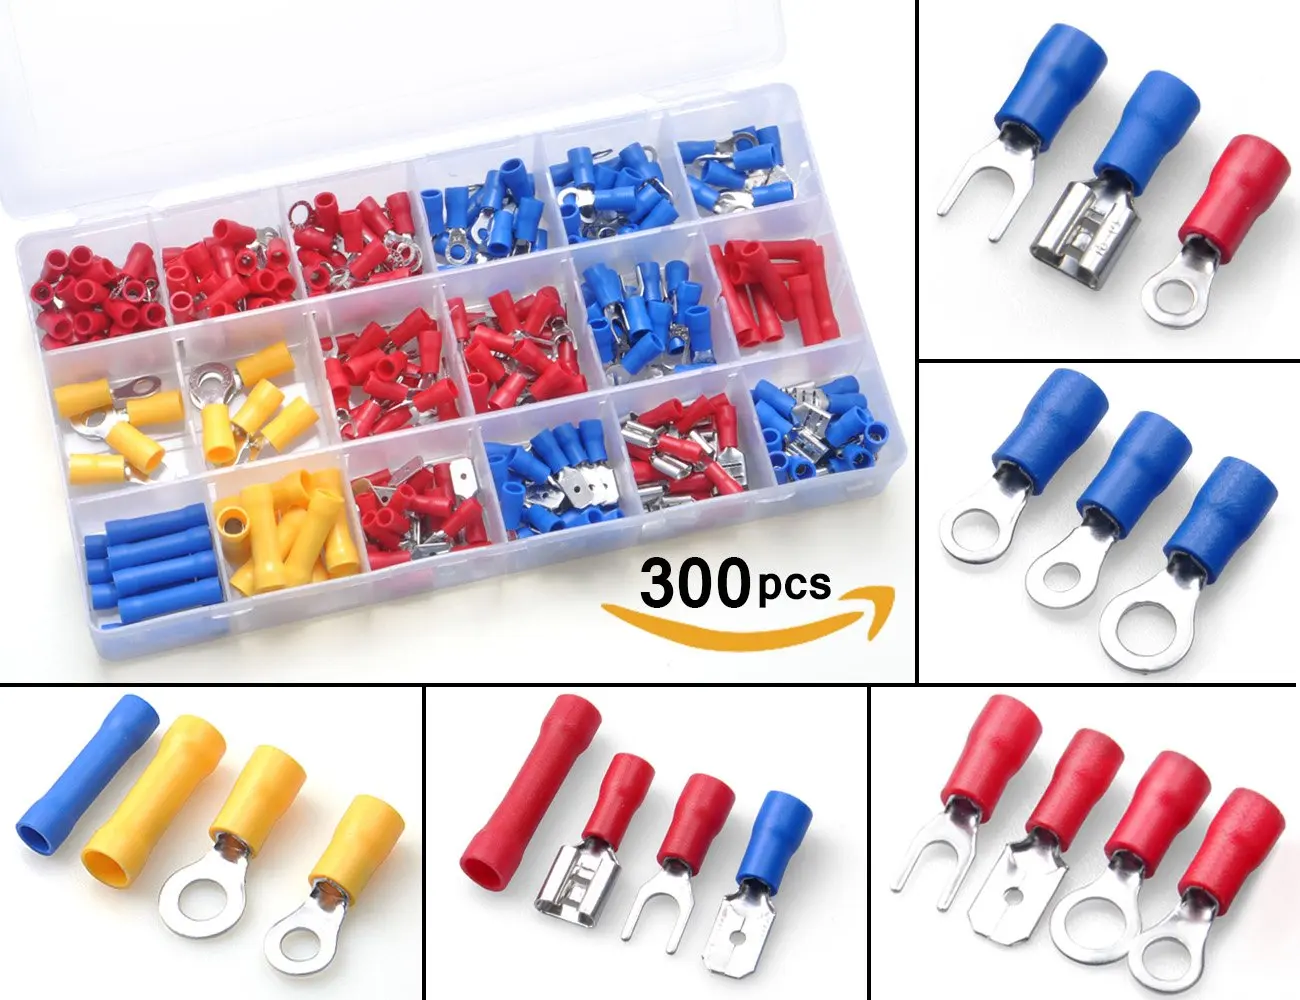 720Pcs Electrical Connectors,Sopoby Mixed Assorted Lug Kit Insulated Spade Wire